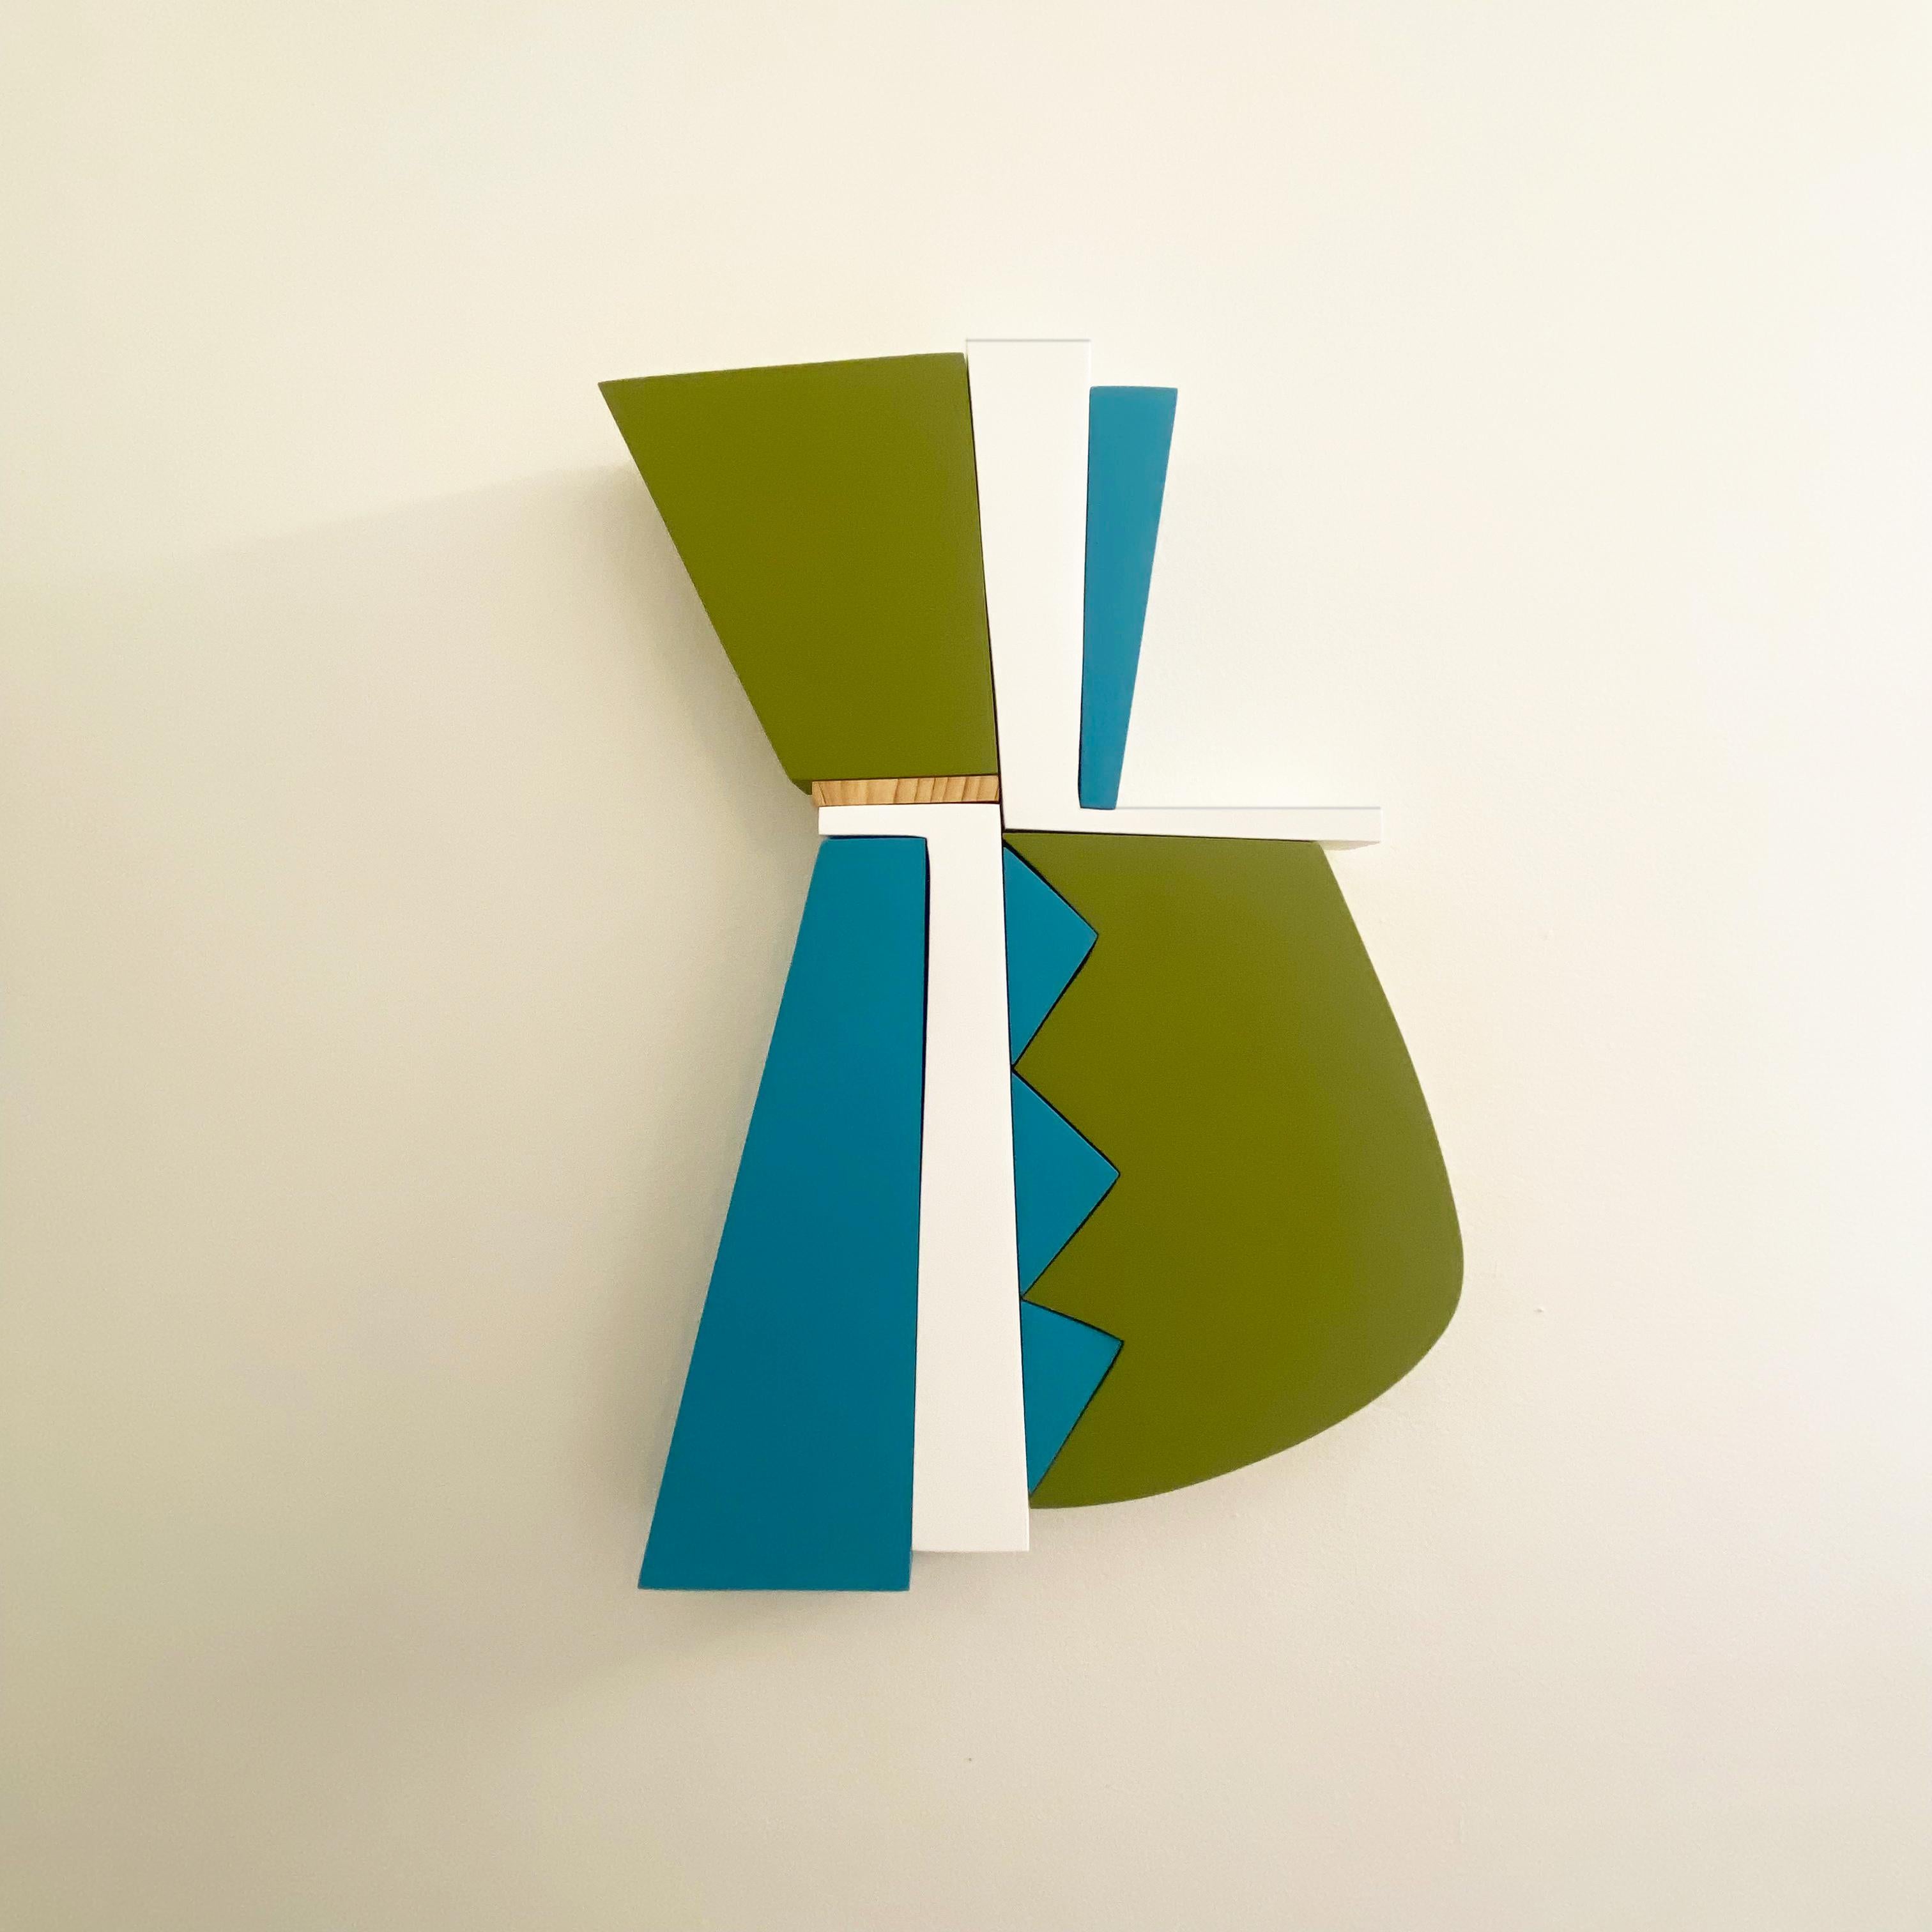 Spray Acrylic on solid poplar

Small Pop series are minimalist driven, wood wall sculptures that are small and blocky and feature bright saturated colors. The pieces was inspired by my love for simple bold colors and modernist repeating patterns